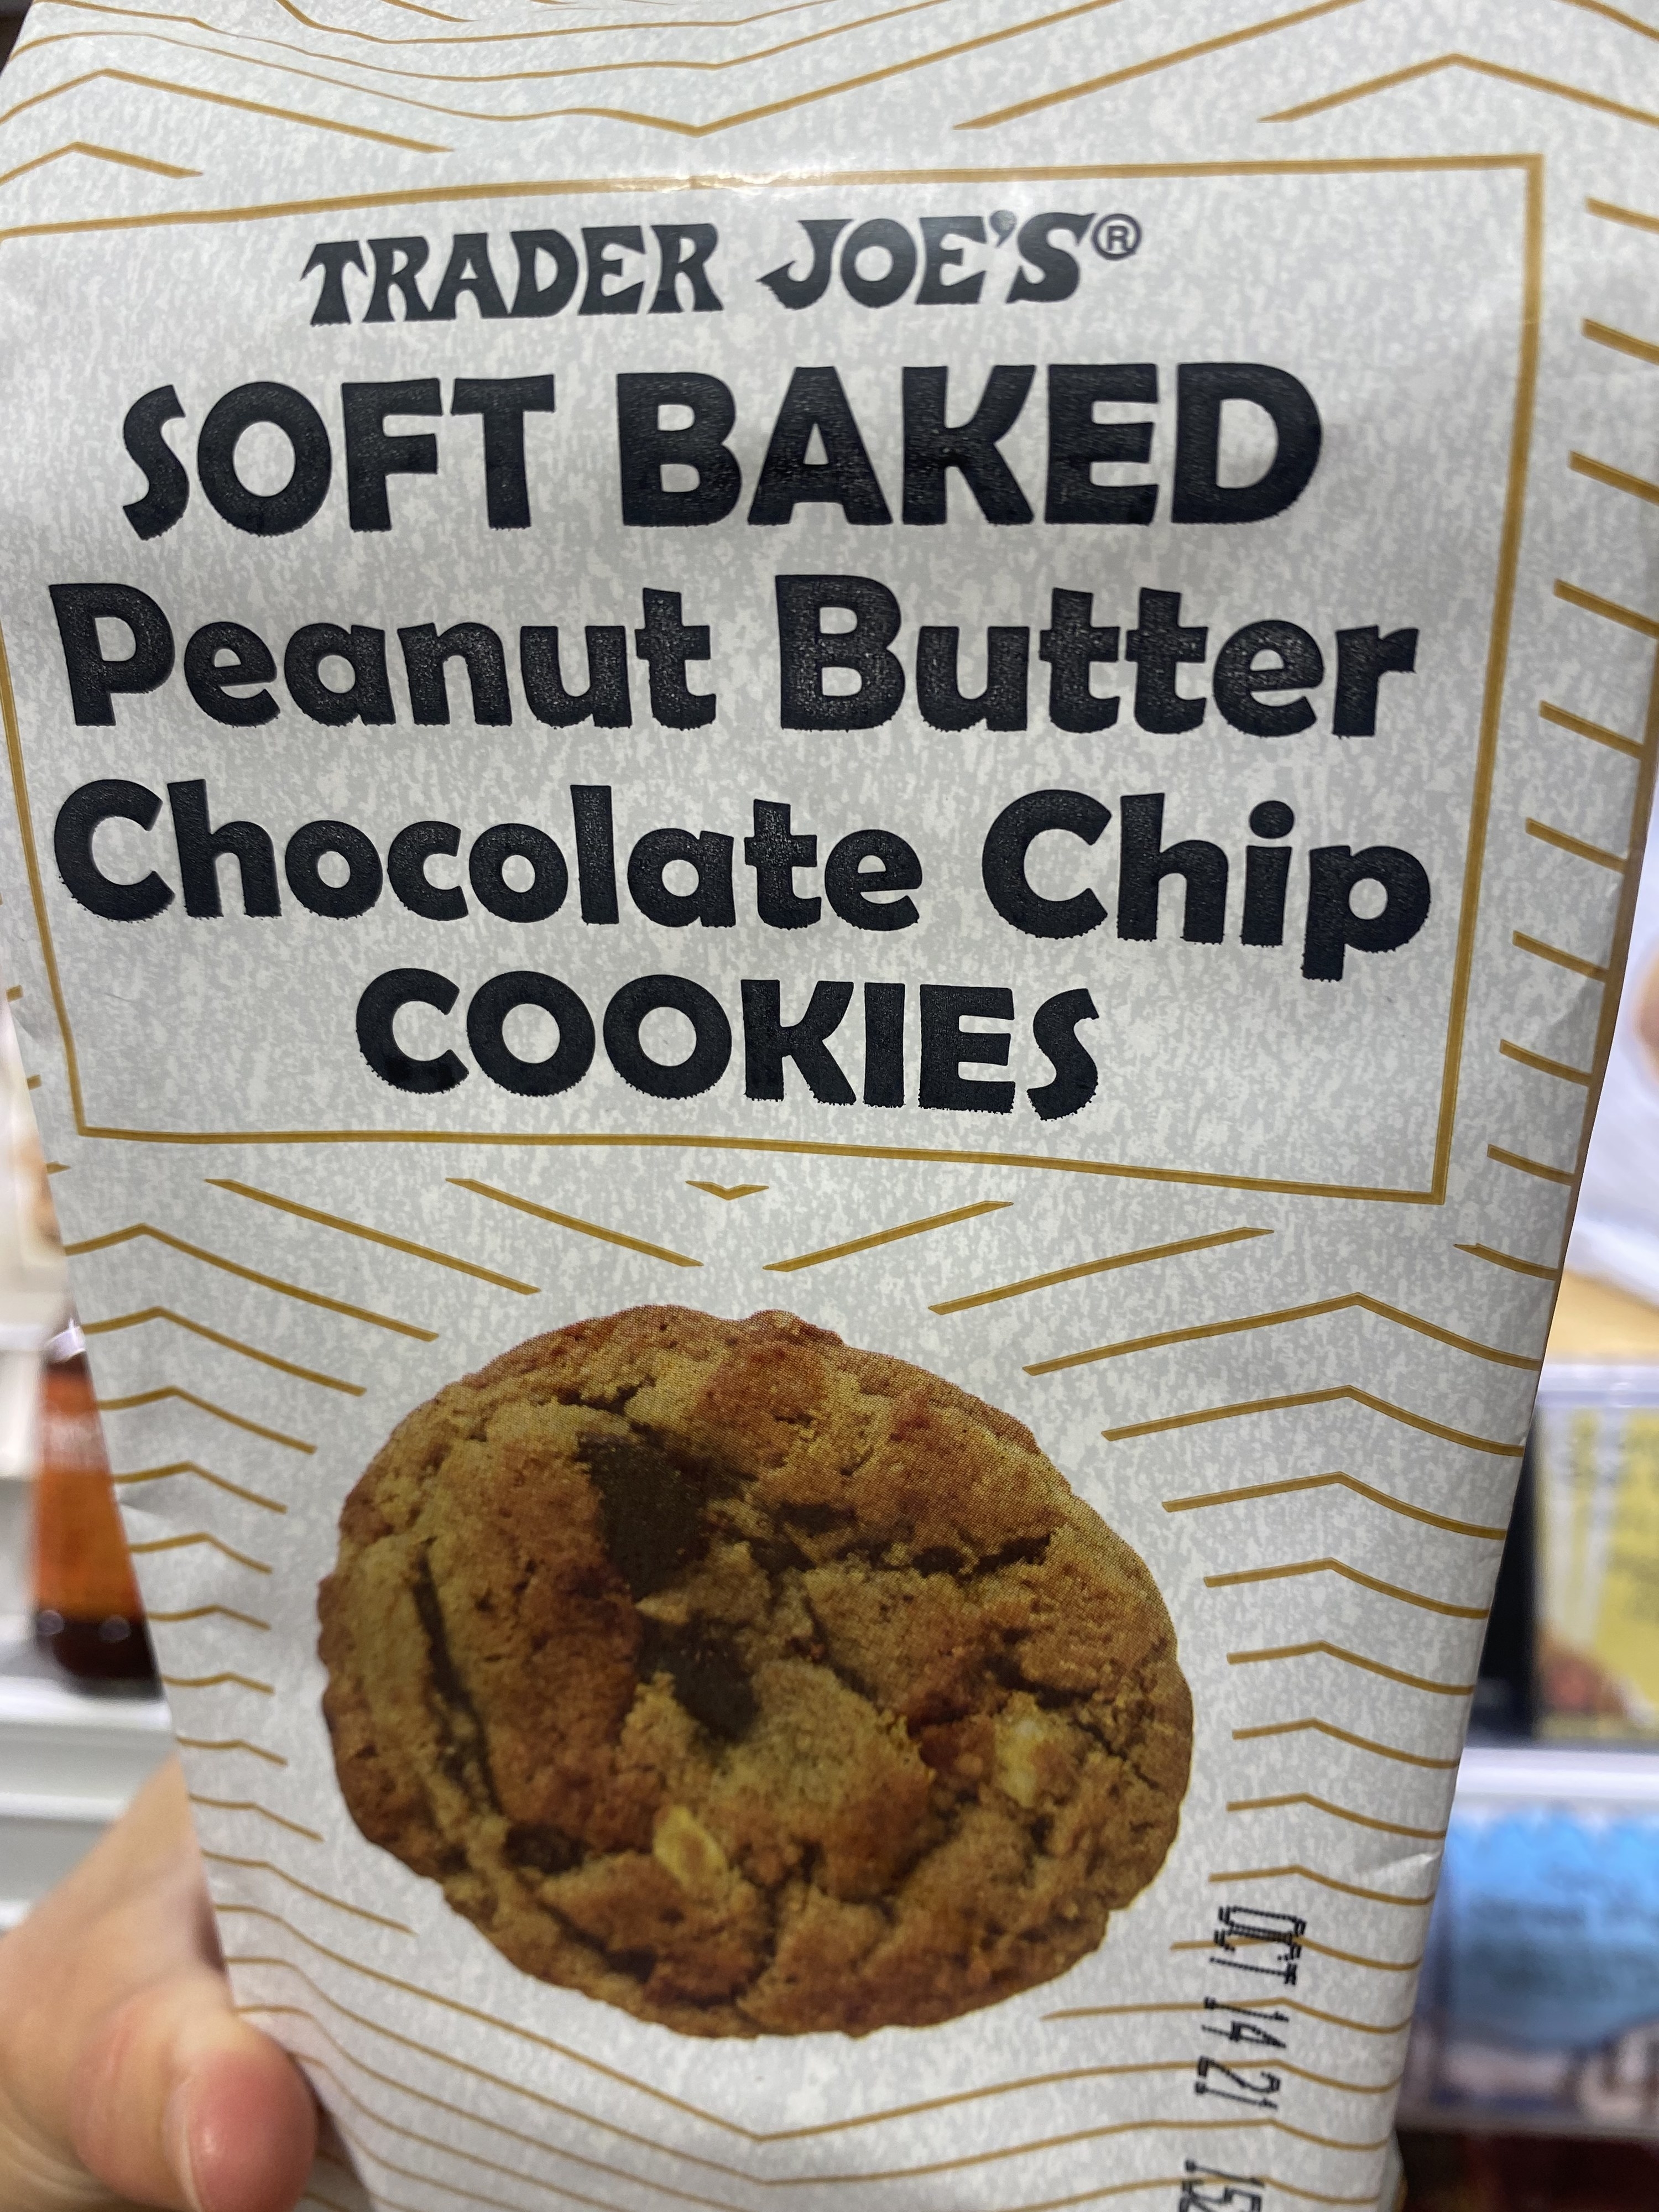 Soft Baked Peanut Butter Chocolate Chip Cookies